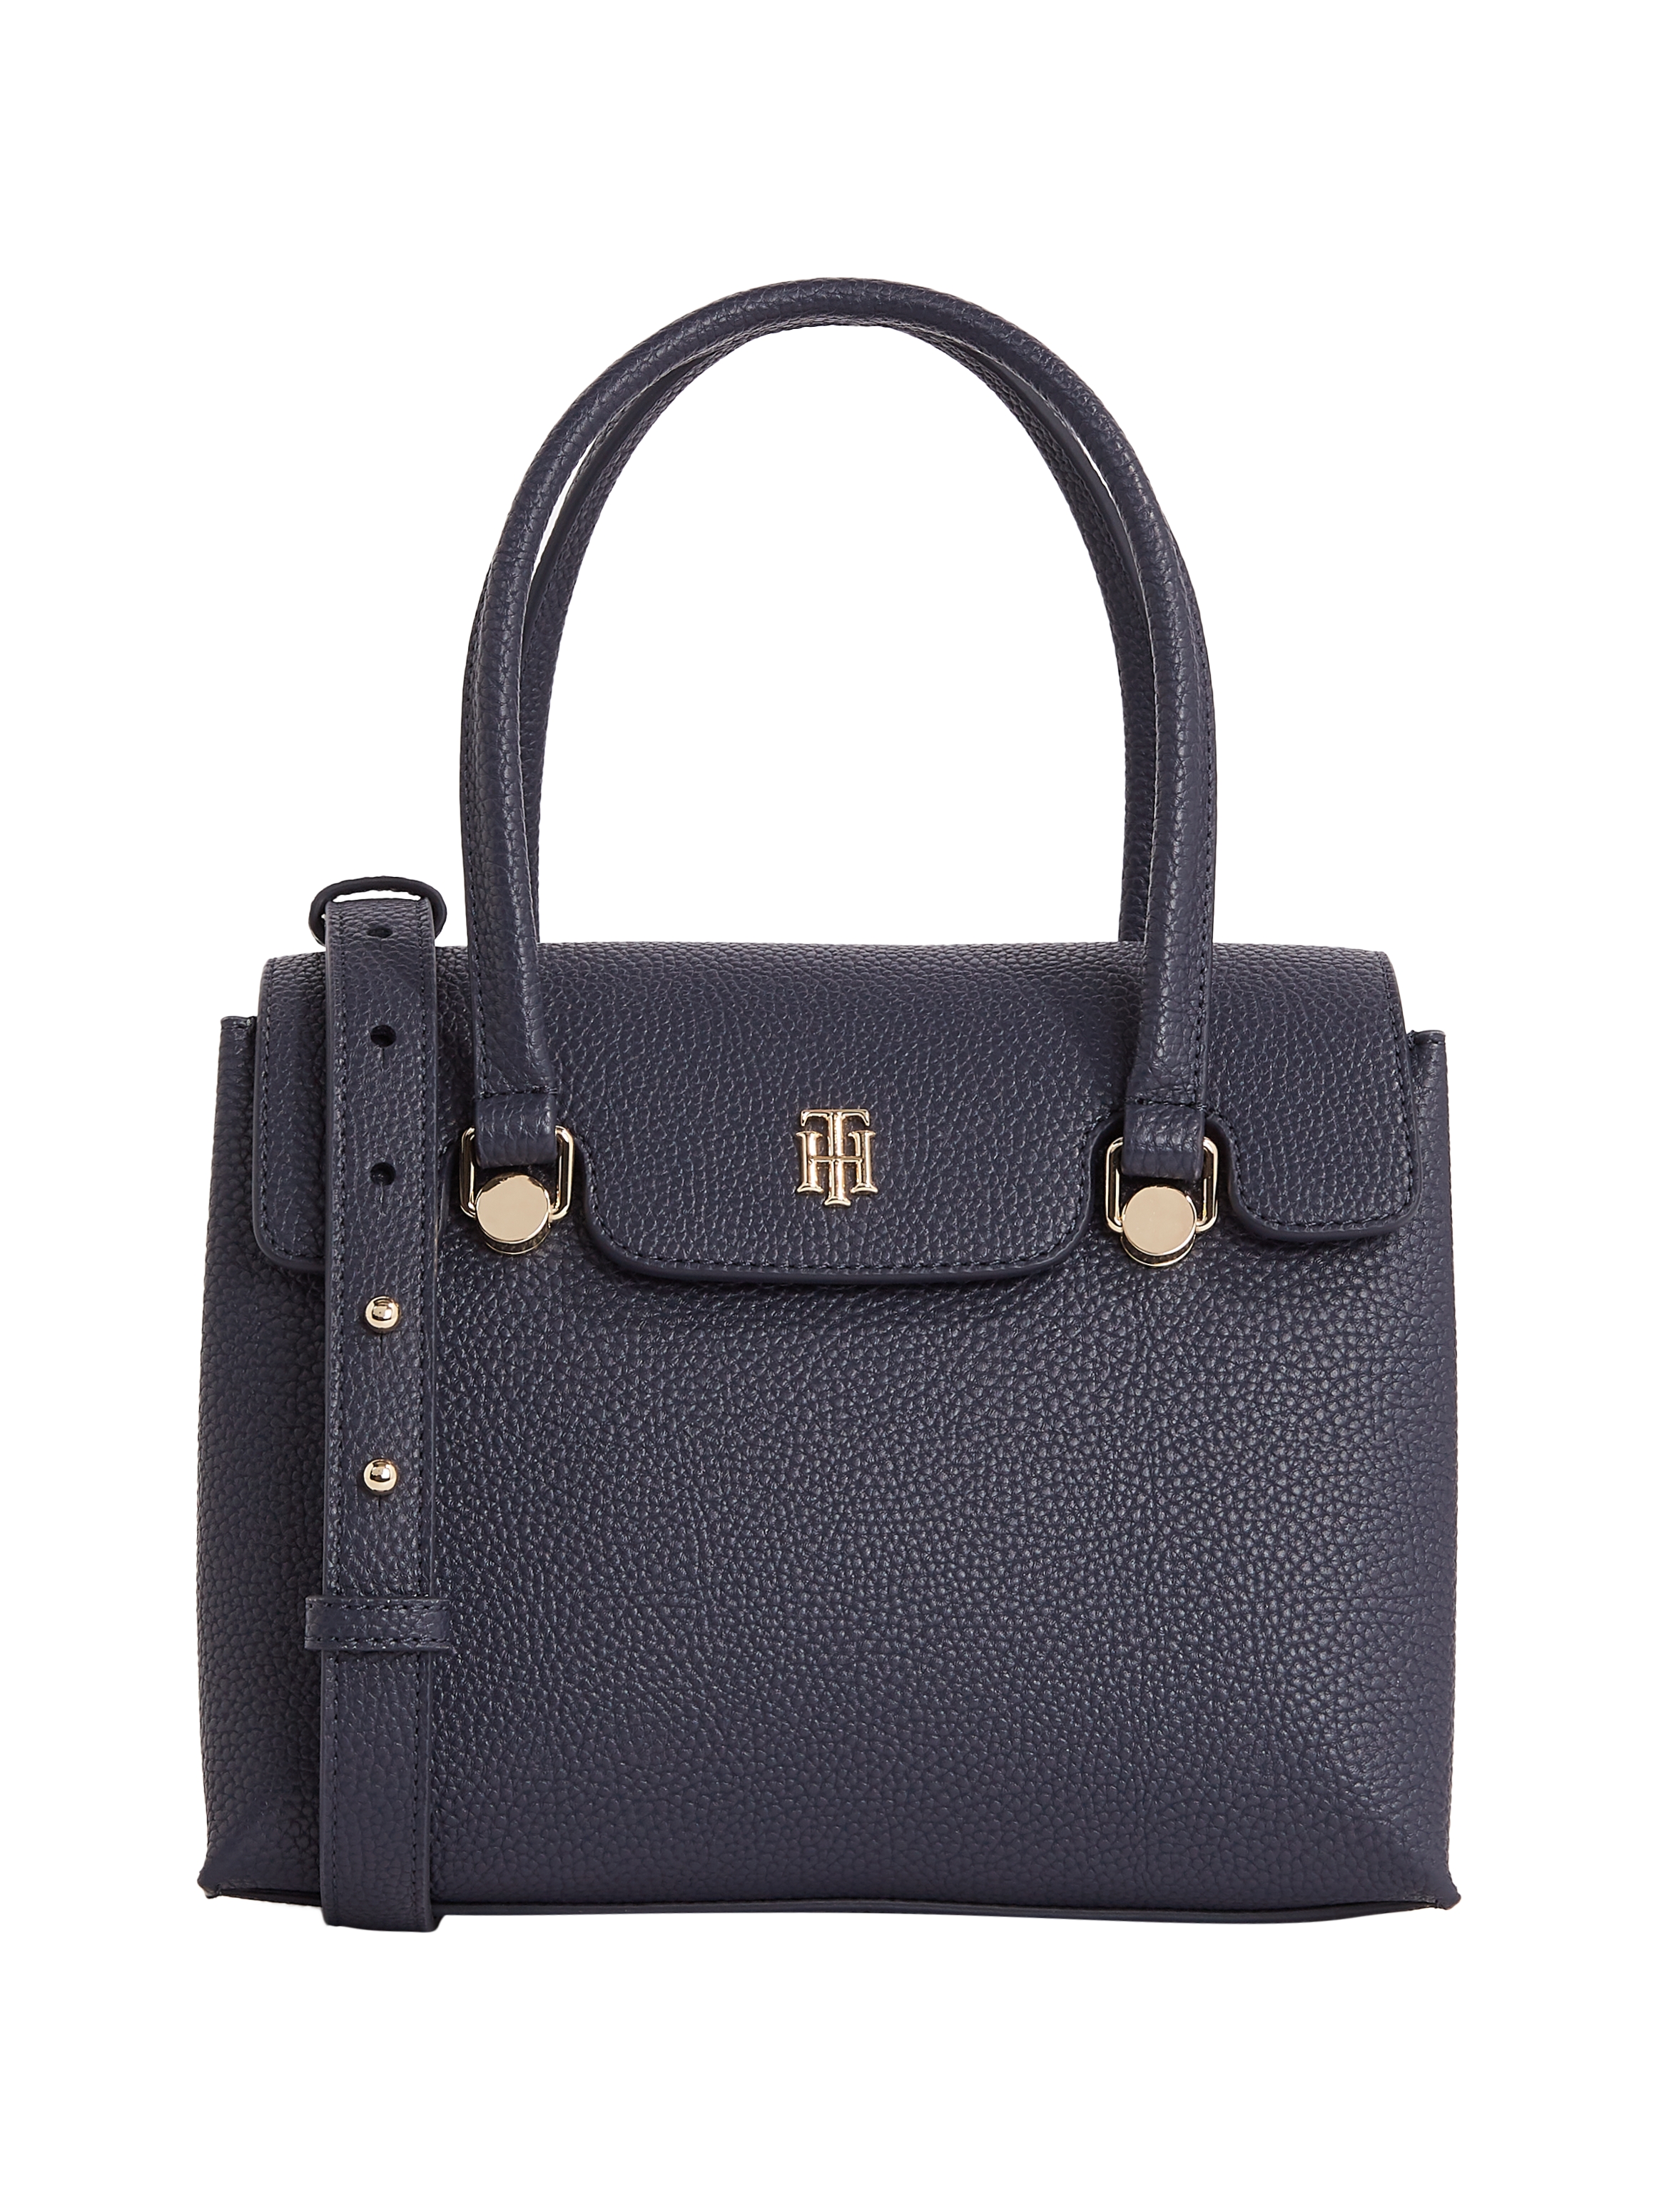 Tommy Hilfiger TH ELEMENT SMALL SATCHEL